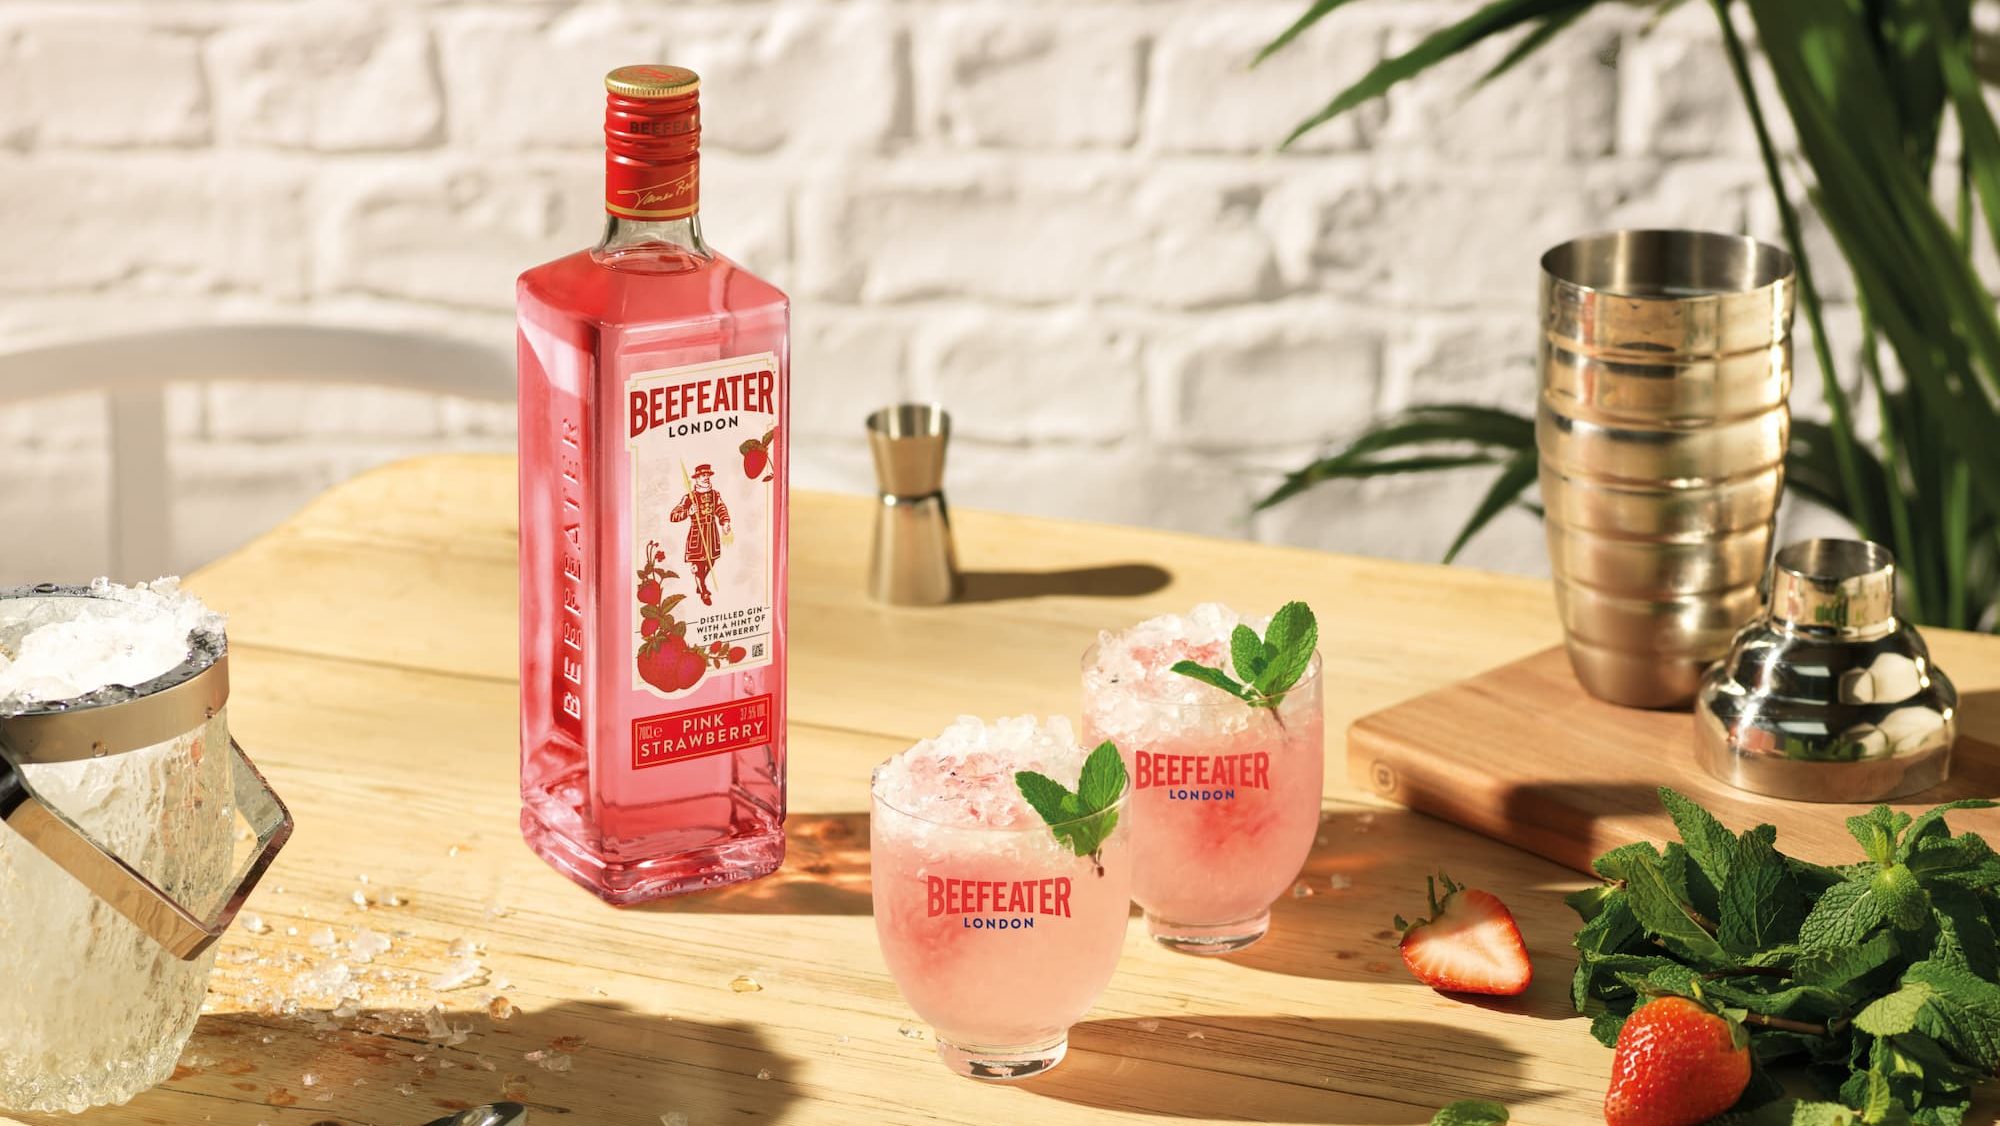 Pink Strawberry Bramble cocktail recipe - Beefeater Gin